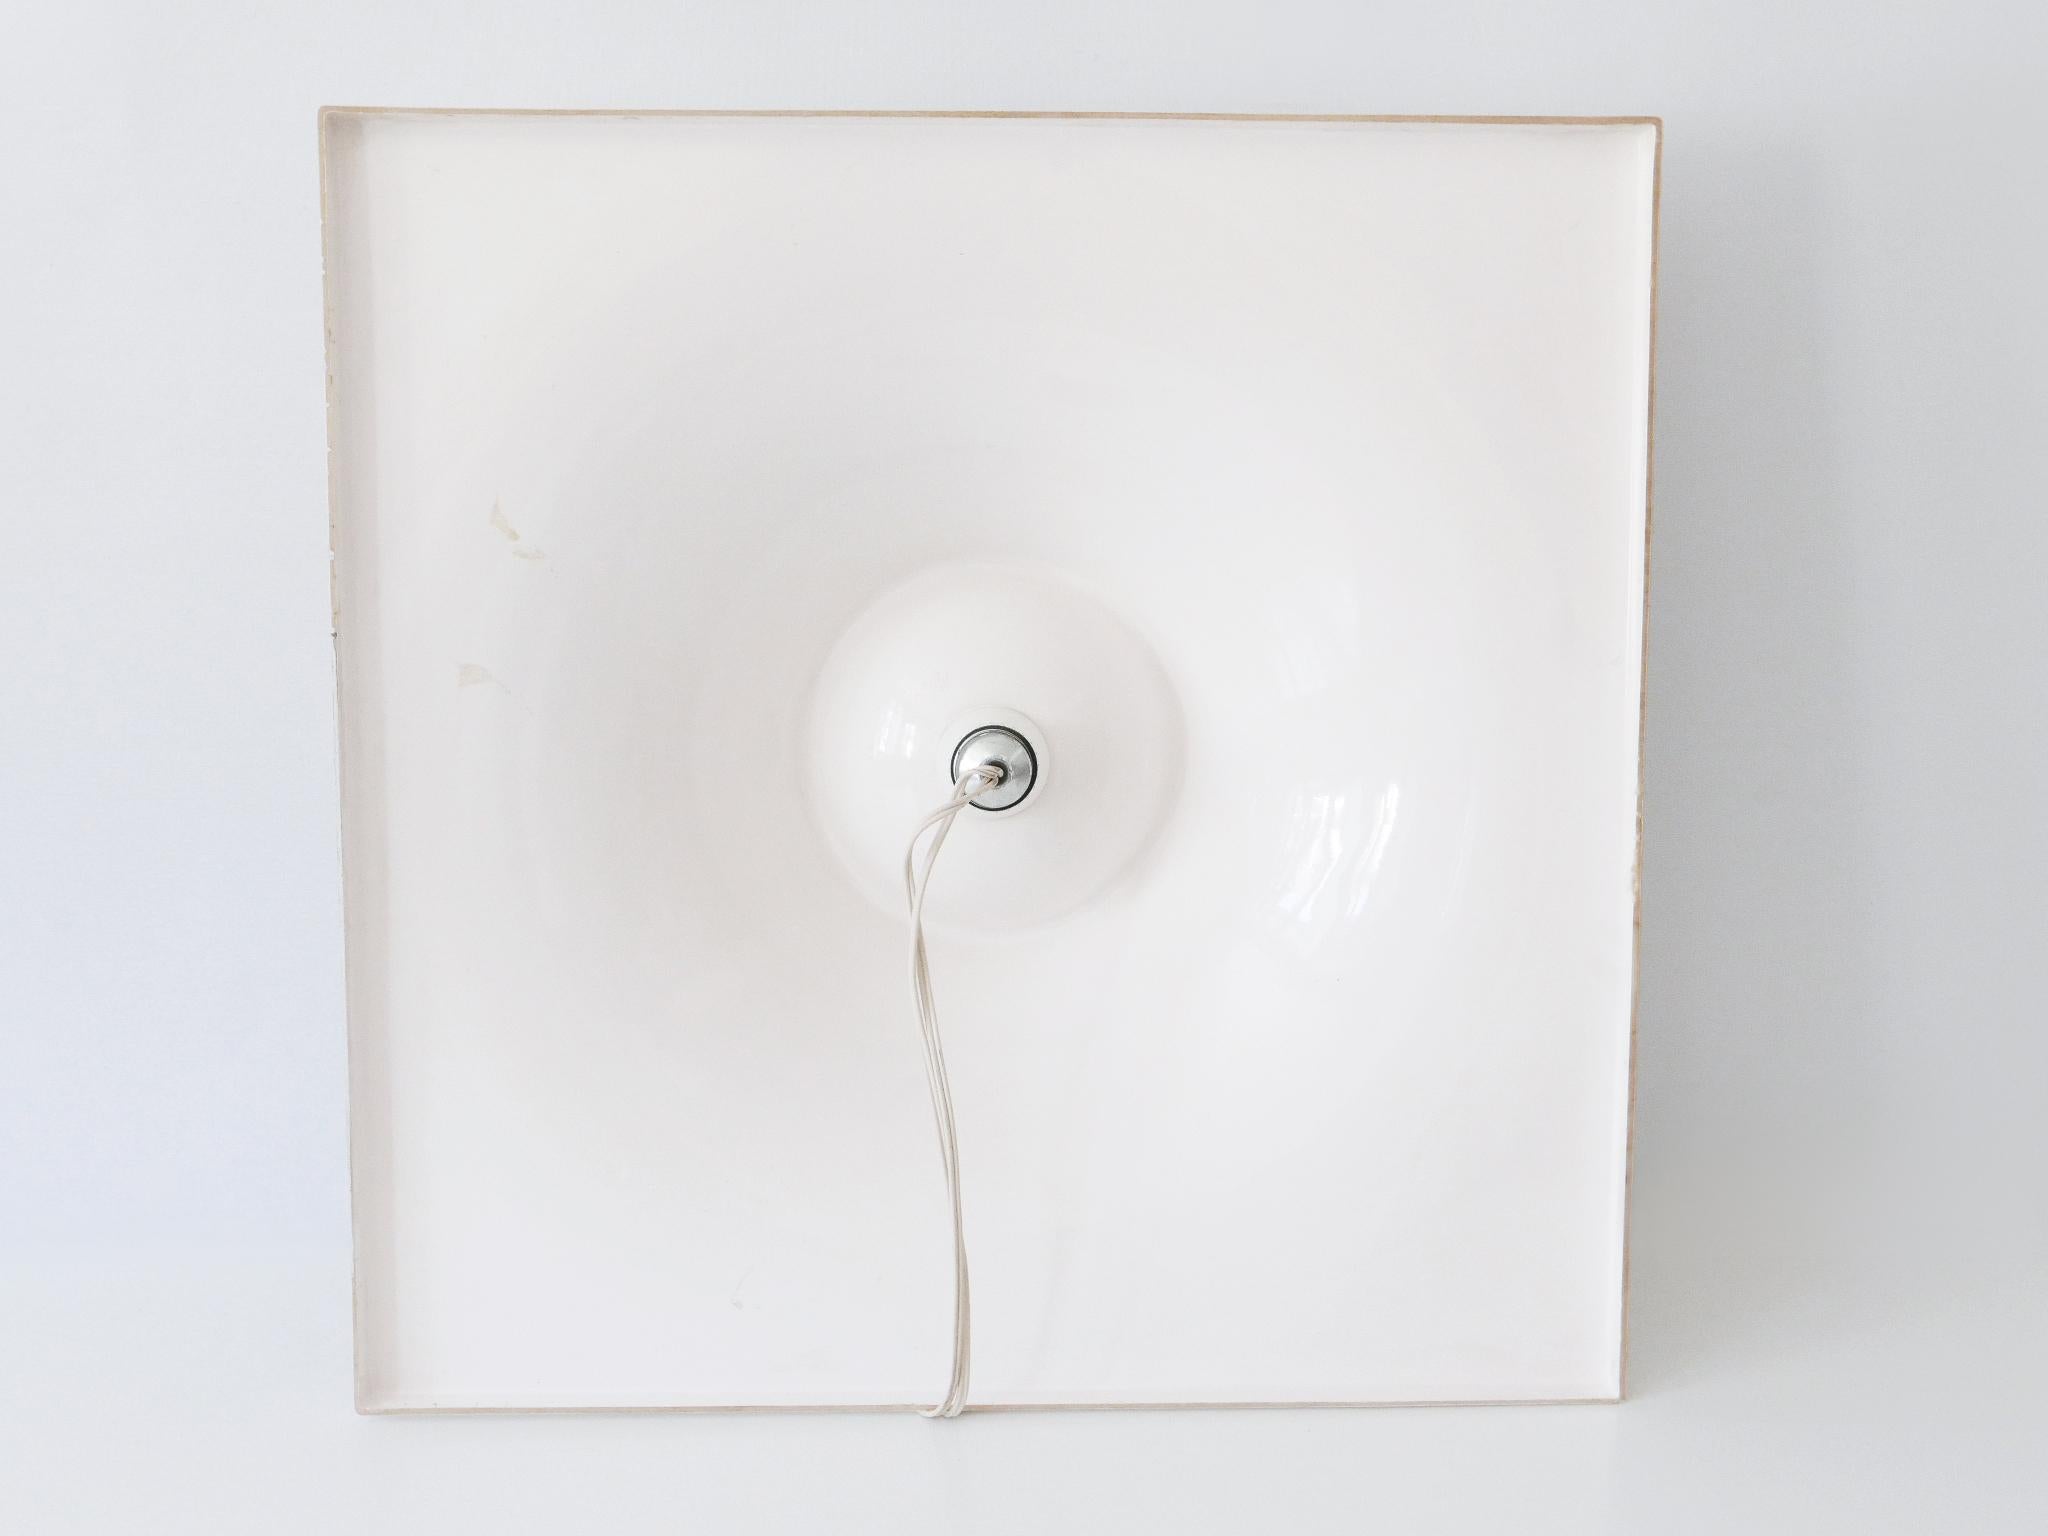 Set of Three Large Mid-Century Modern Fiberglass Sconces or Wall Lamps 1970s For Sale 8